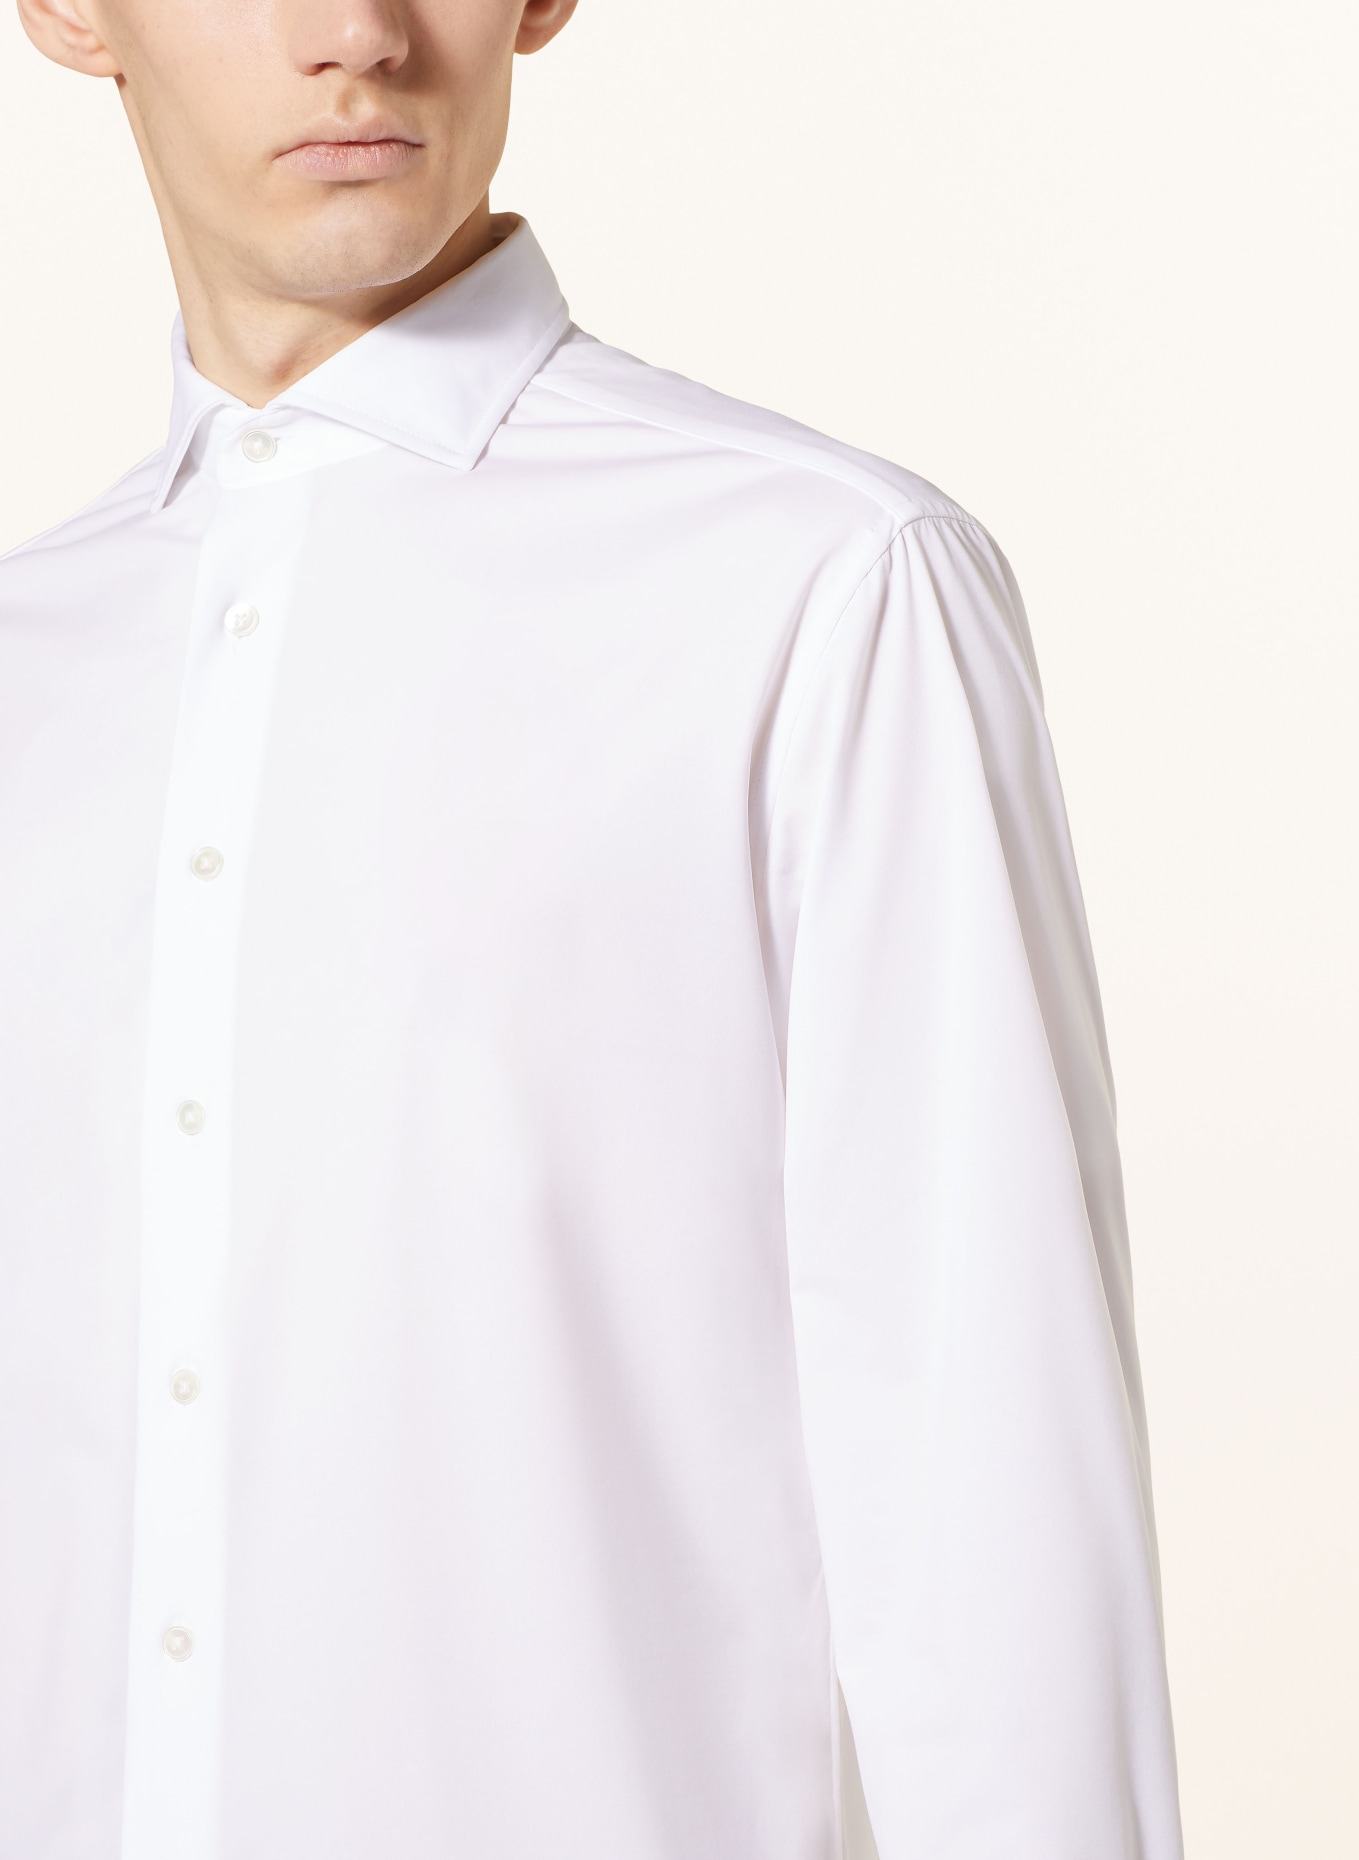 TRAIANO Jersey shirt ROSSINI radical fit, Color: WHITE (Image 4)